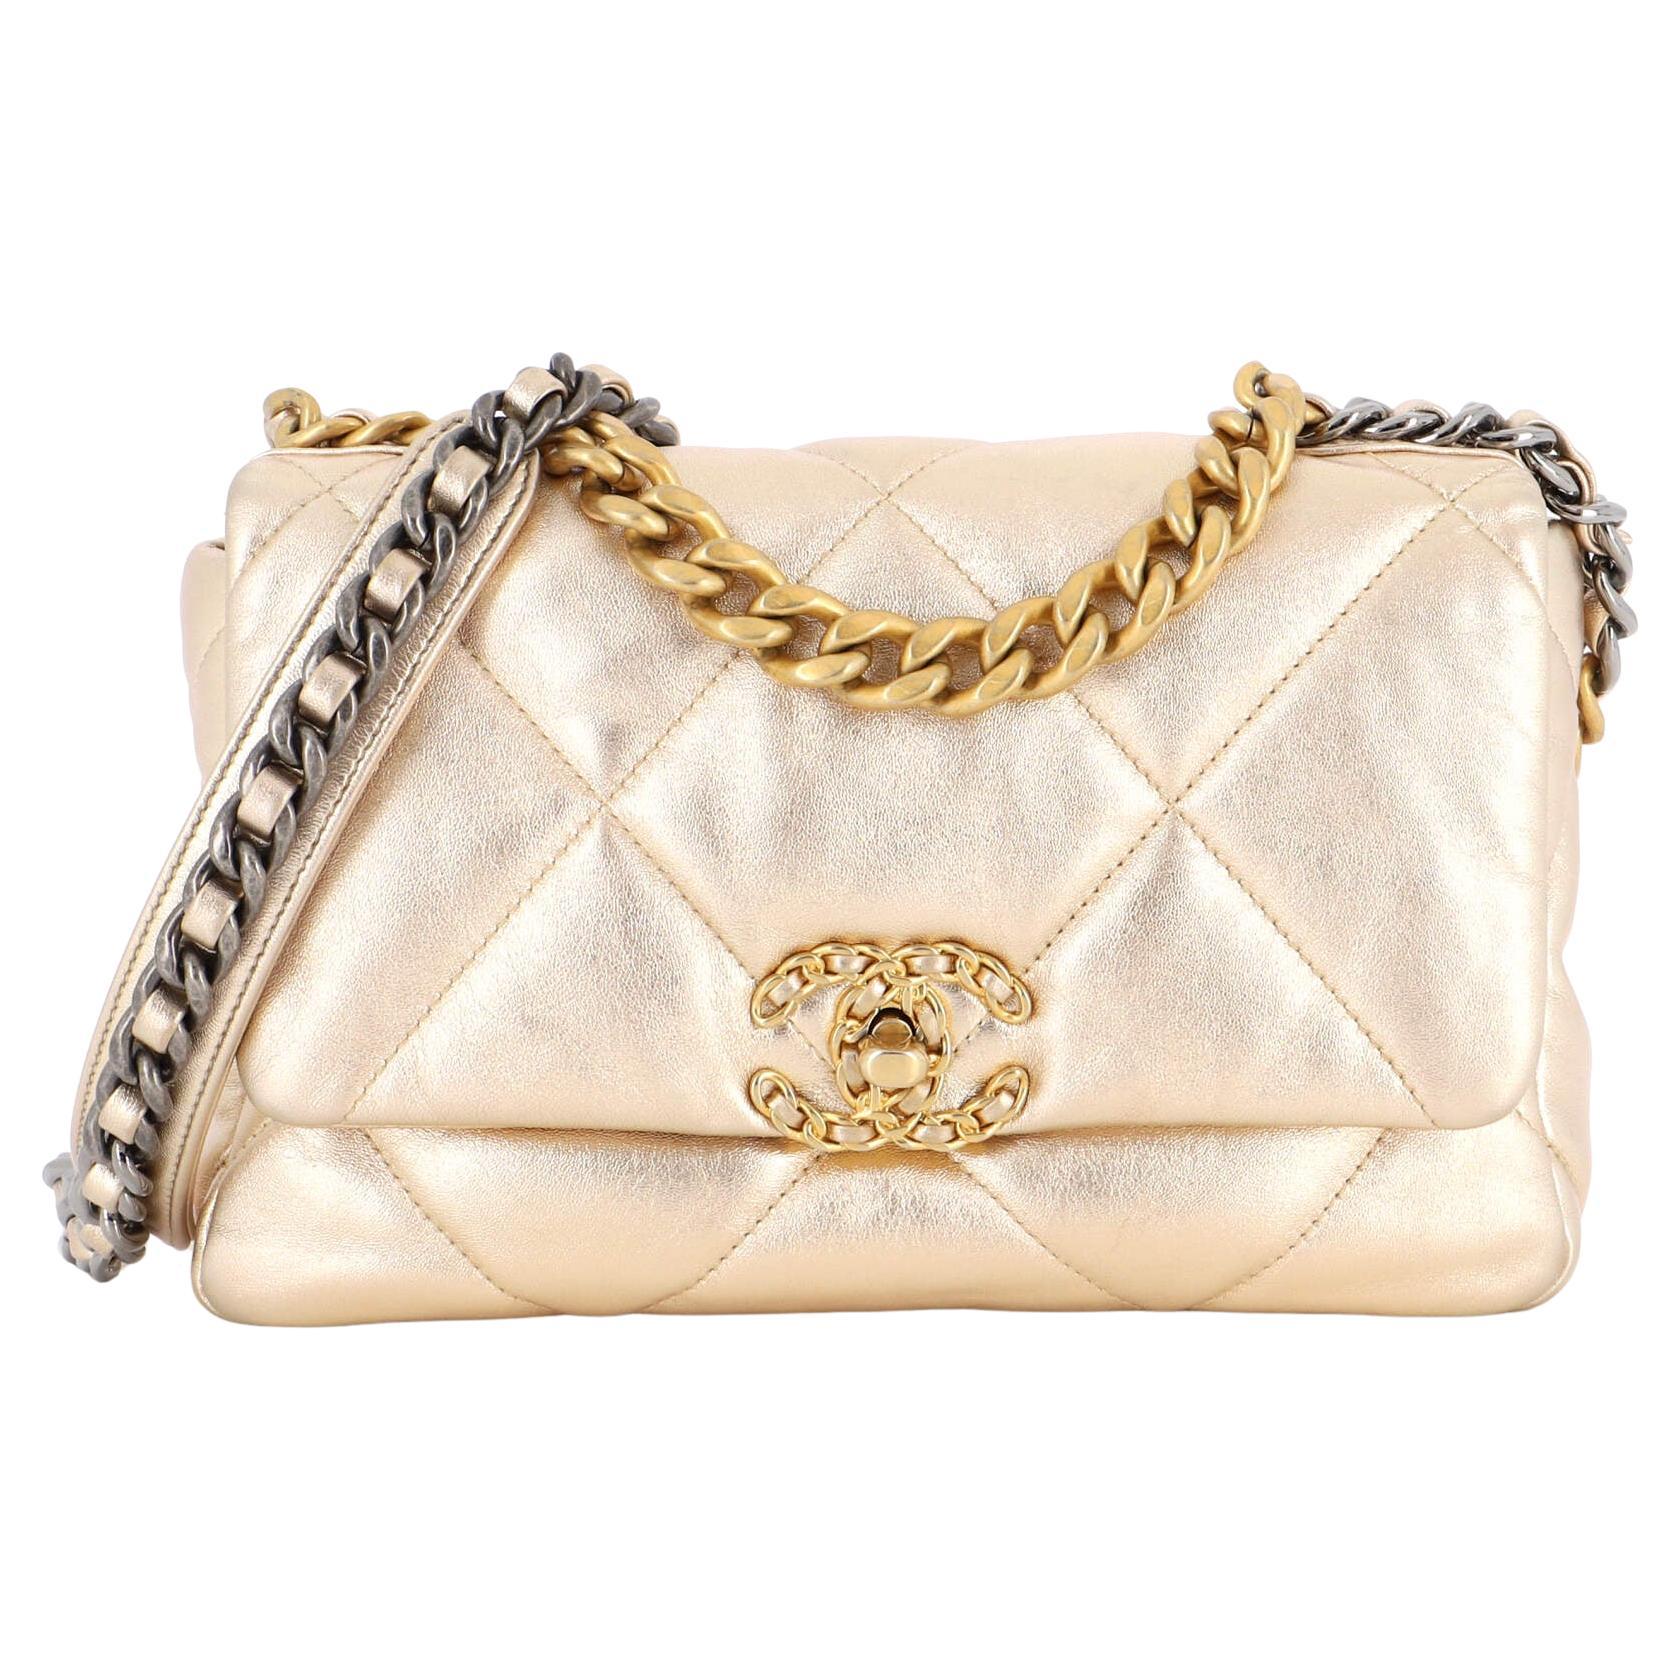 Chanel Small Classic Flap Quilted Metallic Goatskin Bag in Champagne Gold